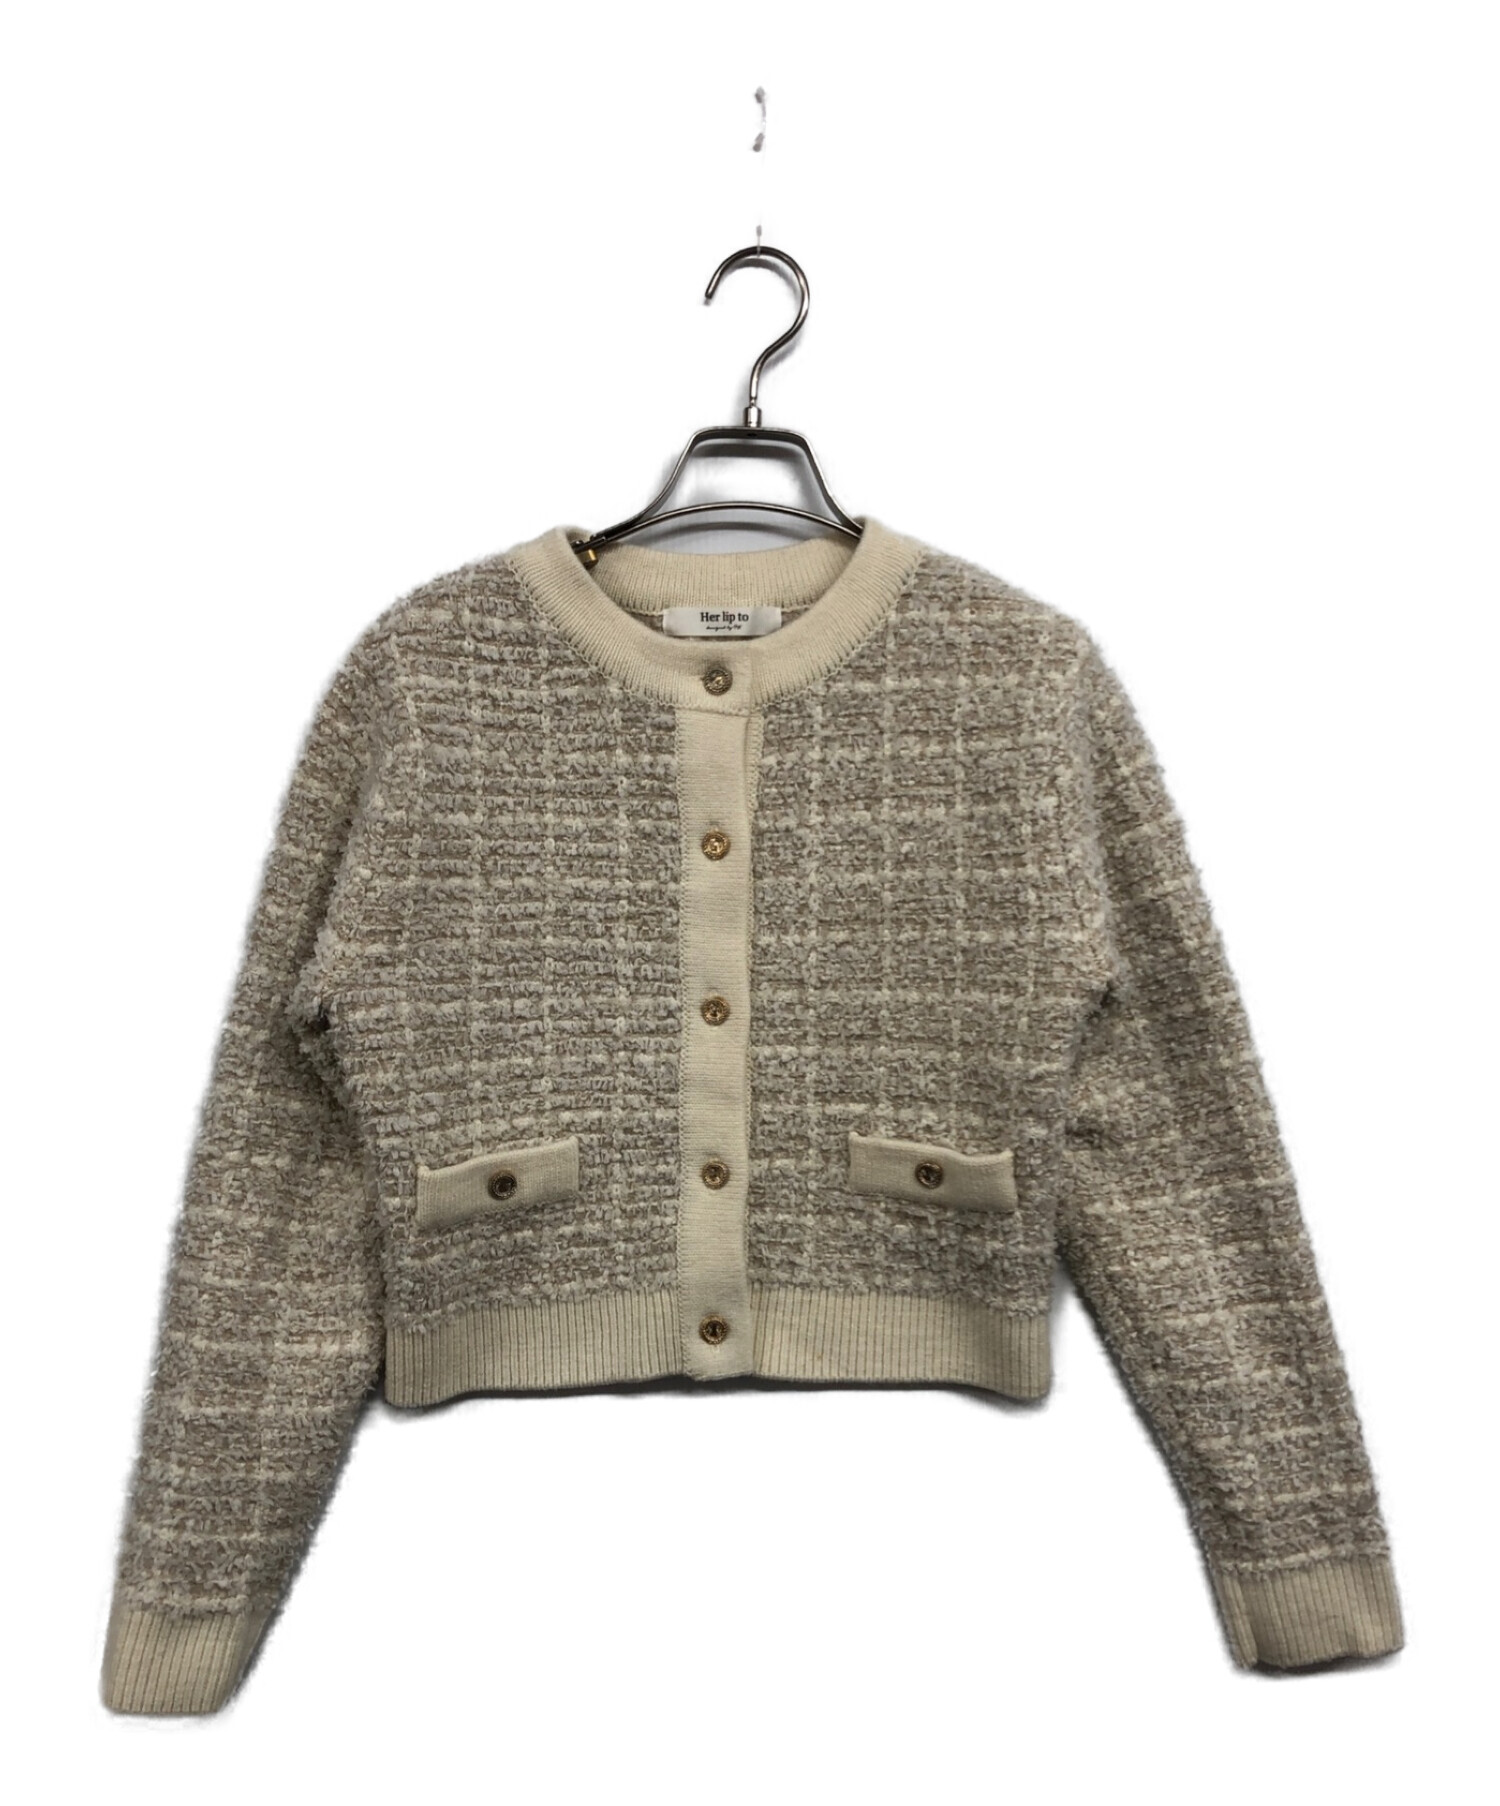 Mercer Tweed Cardigan Her lip to紙タグ付き - a-1construction.com